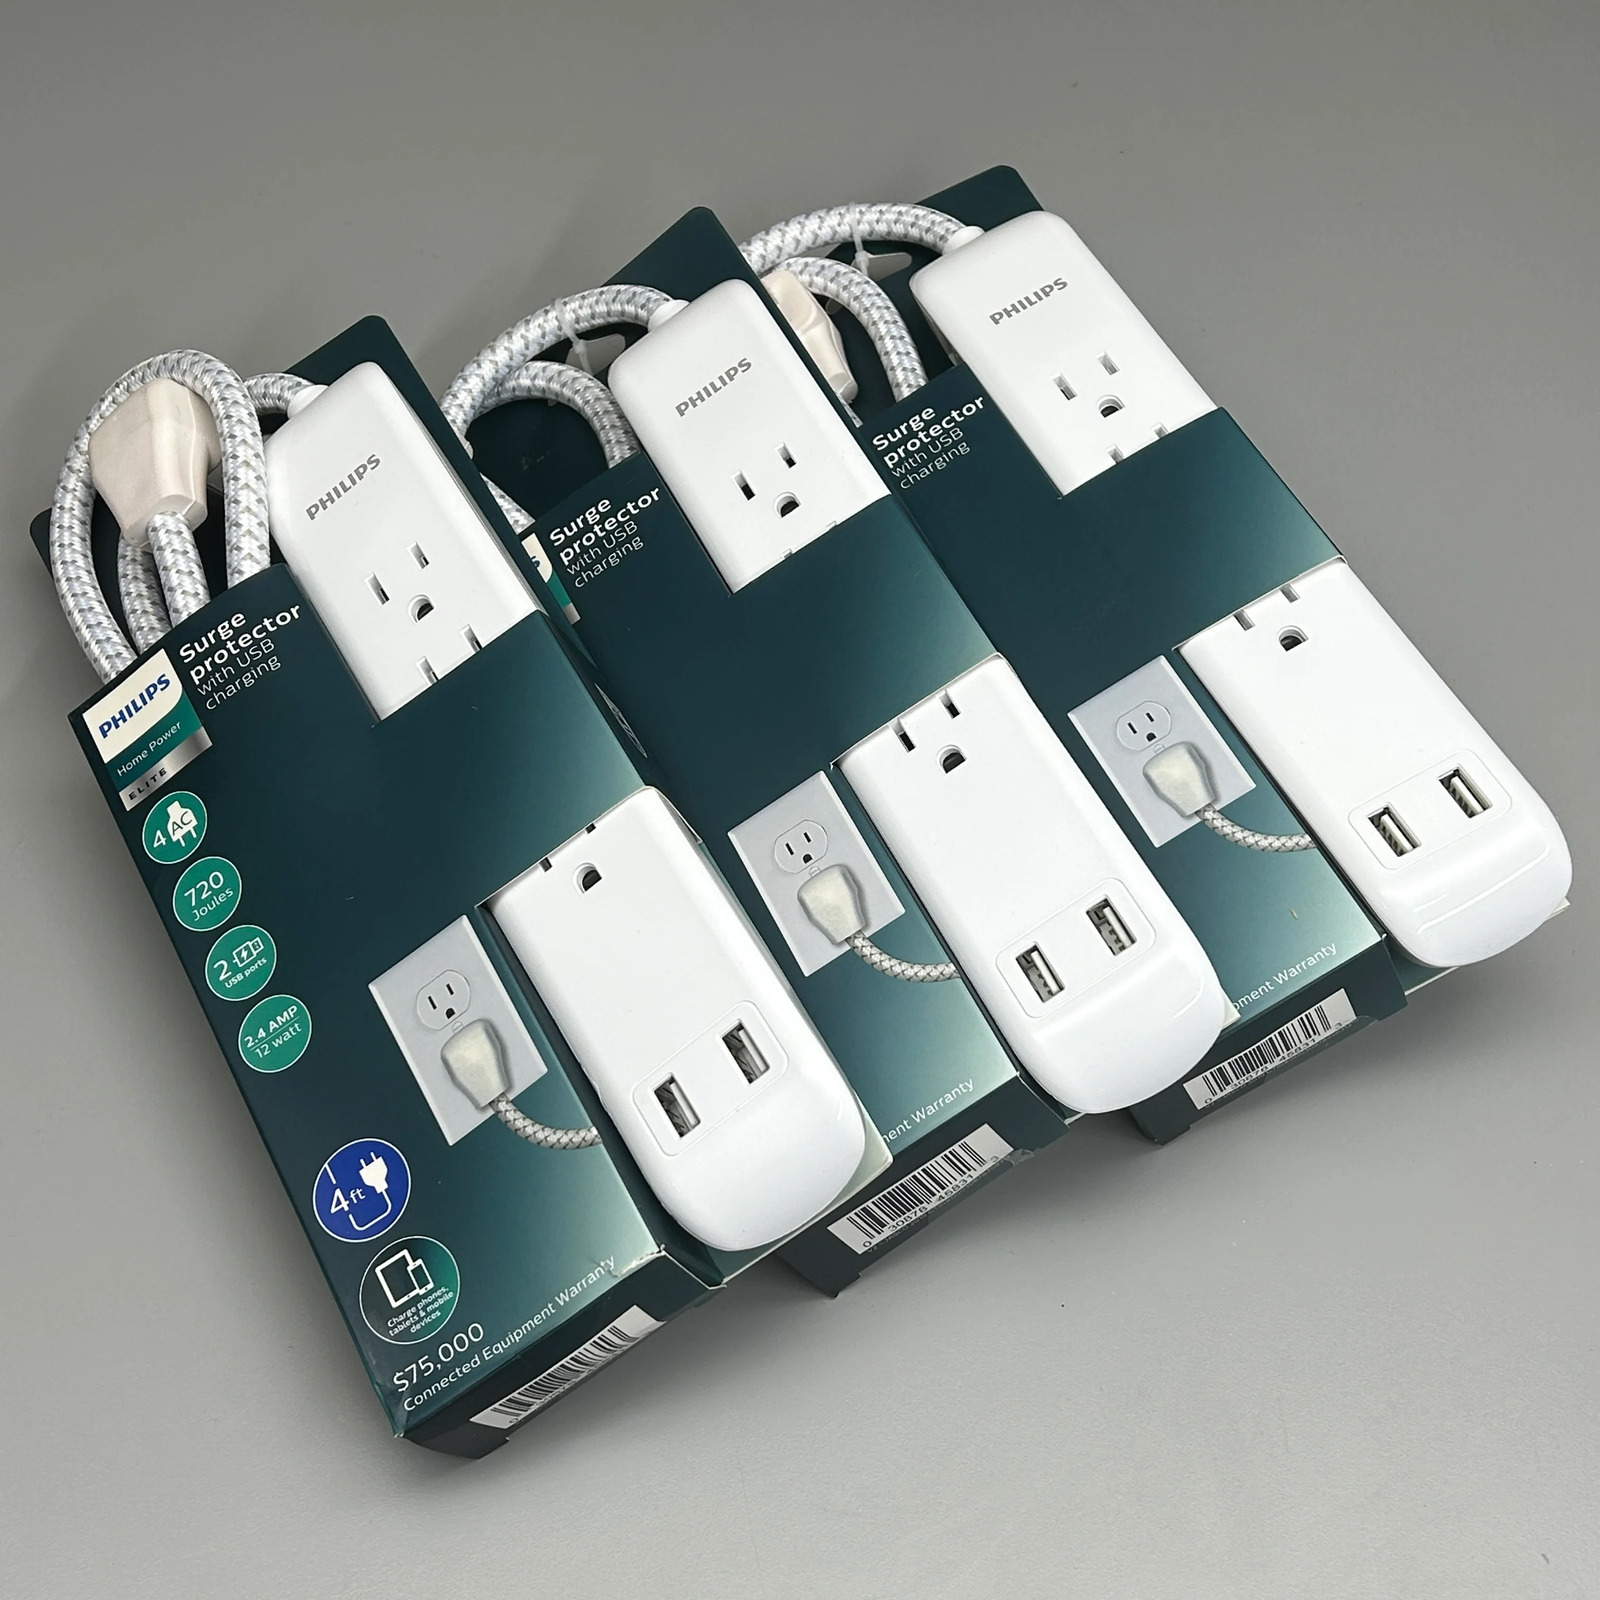 PHILLIPS 3-PACK Surge Protector 4 Outlet 2 USB Power Strip 4ft (New)